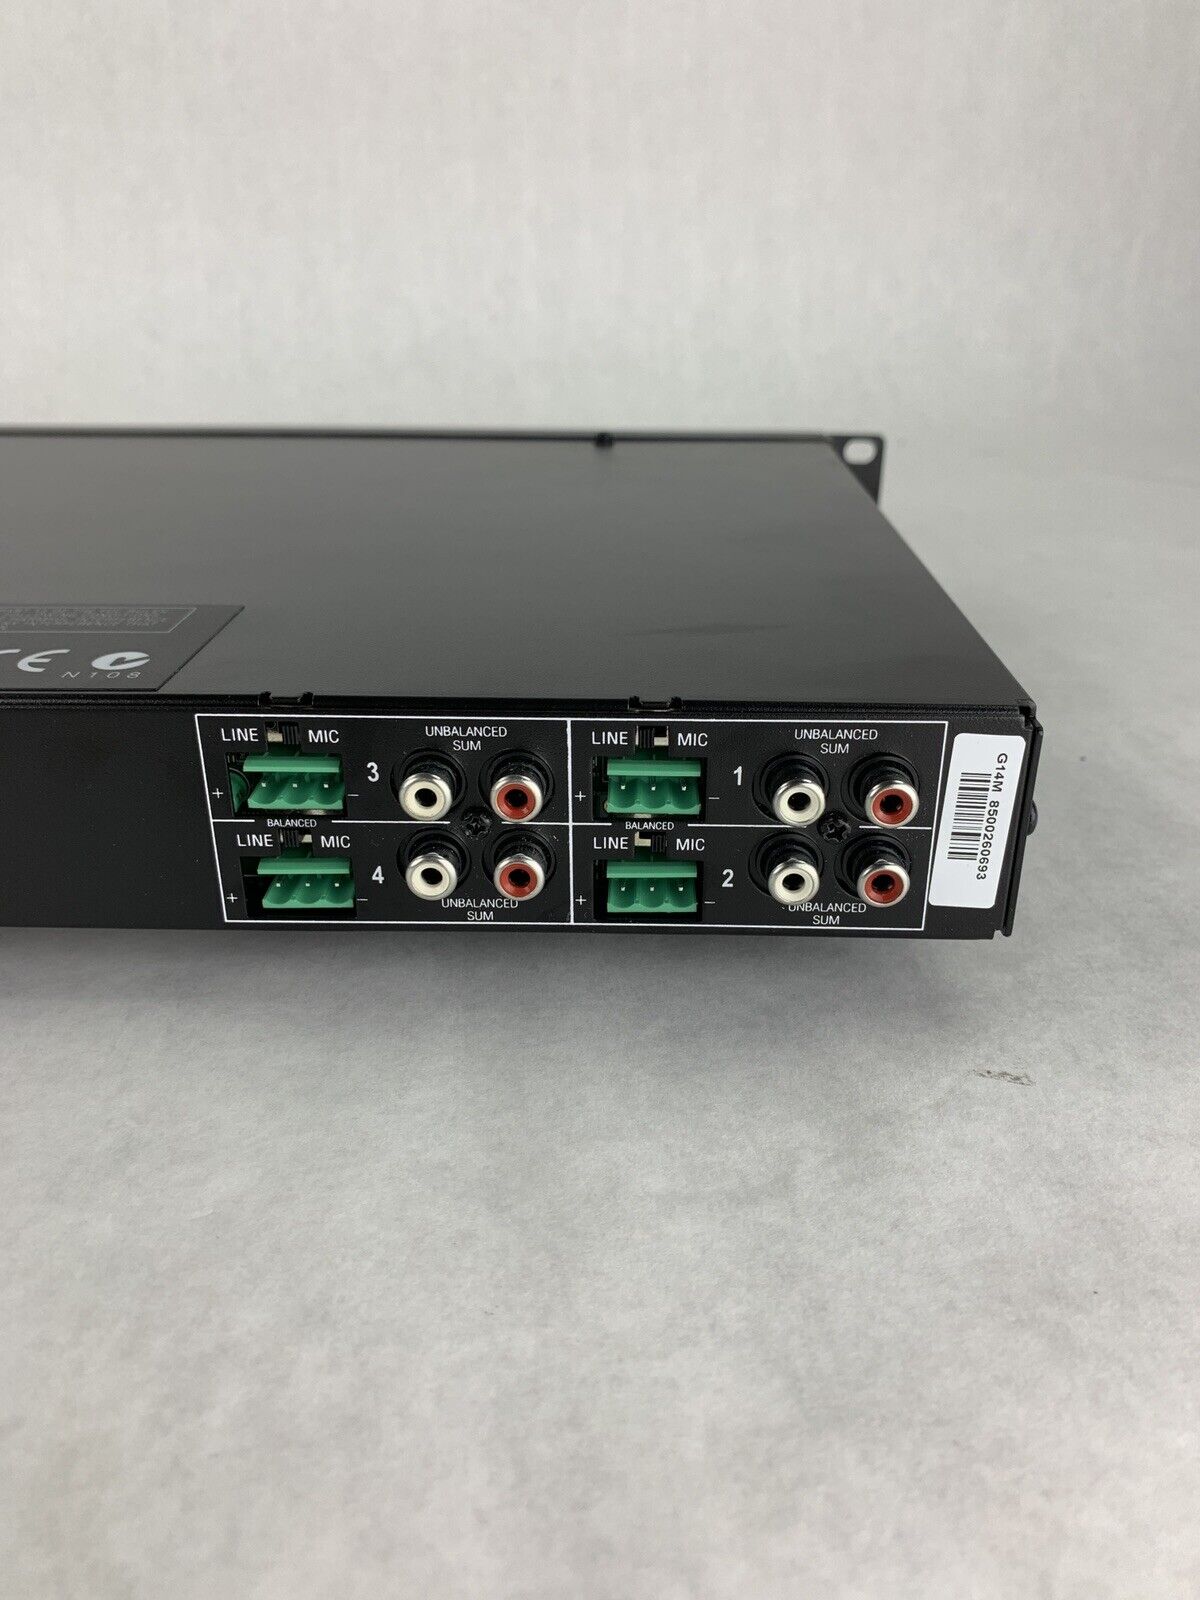 Crown 14M Mixer 4 x 1 Channel Preamp Analog With Tone Generator For Parts